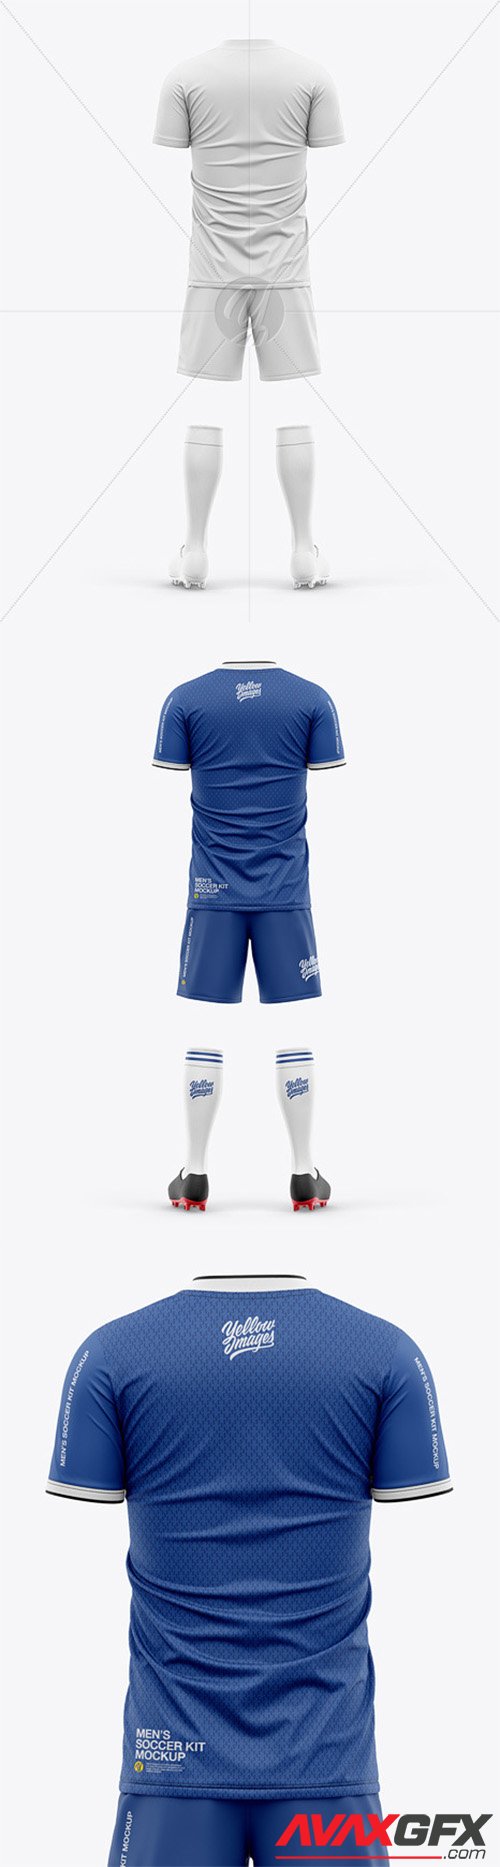 Download Men's Full Soccer Kit with Short Sleeve Jersey Mockup - Back VIew 57124 » AVAXGFX - All ...